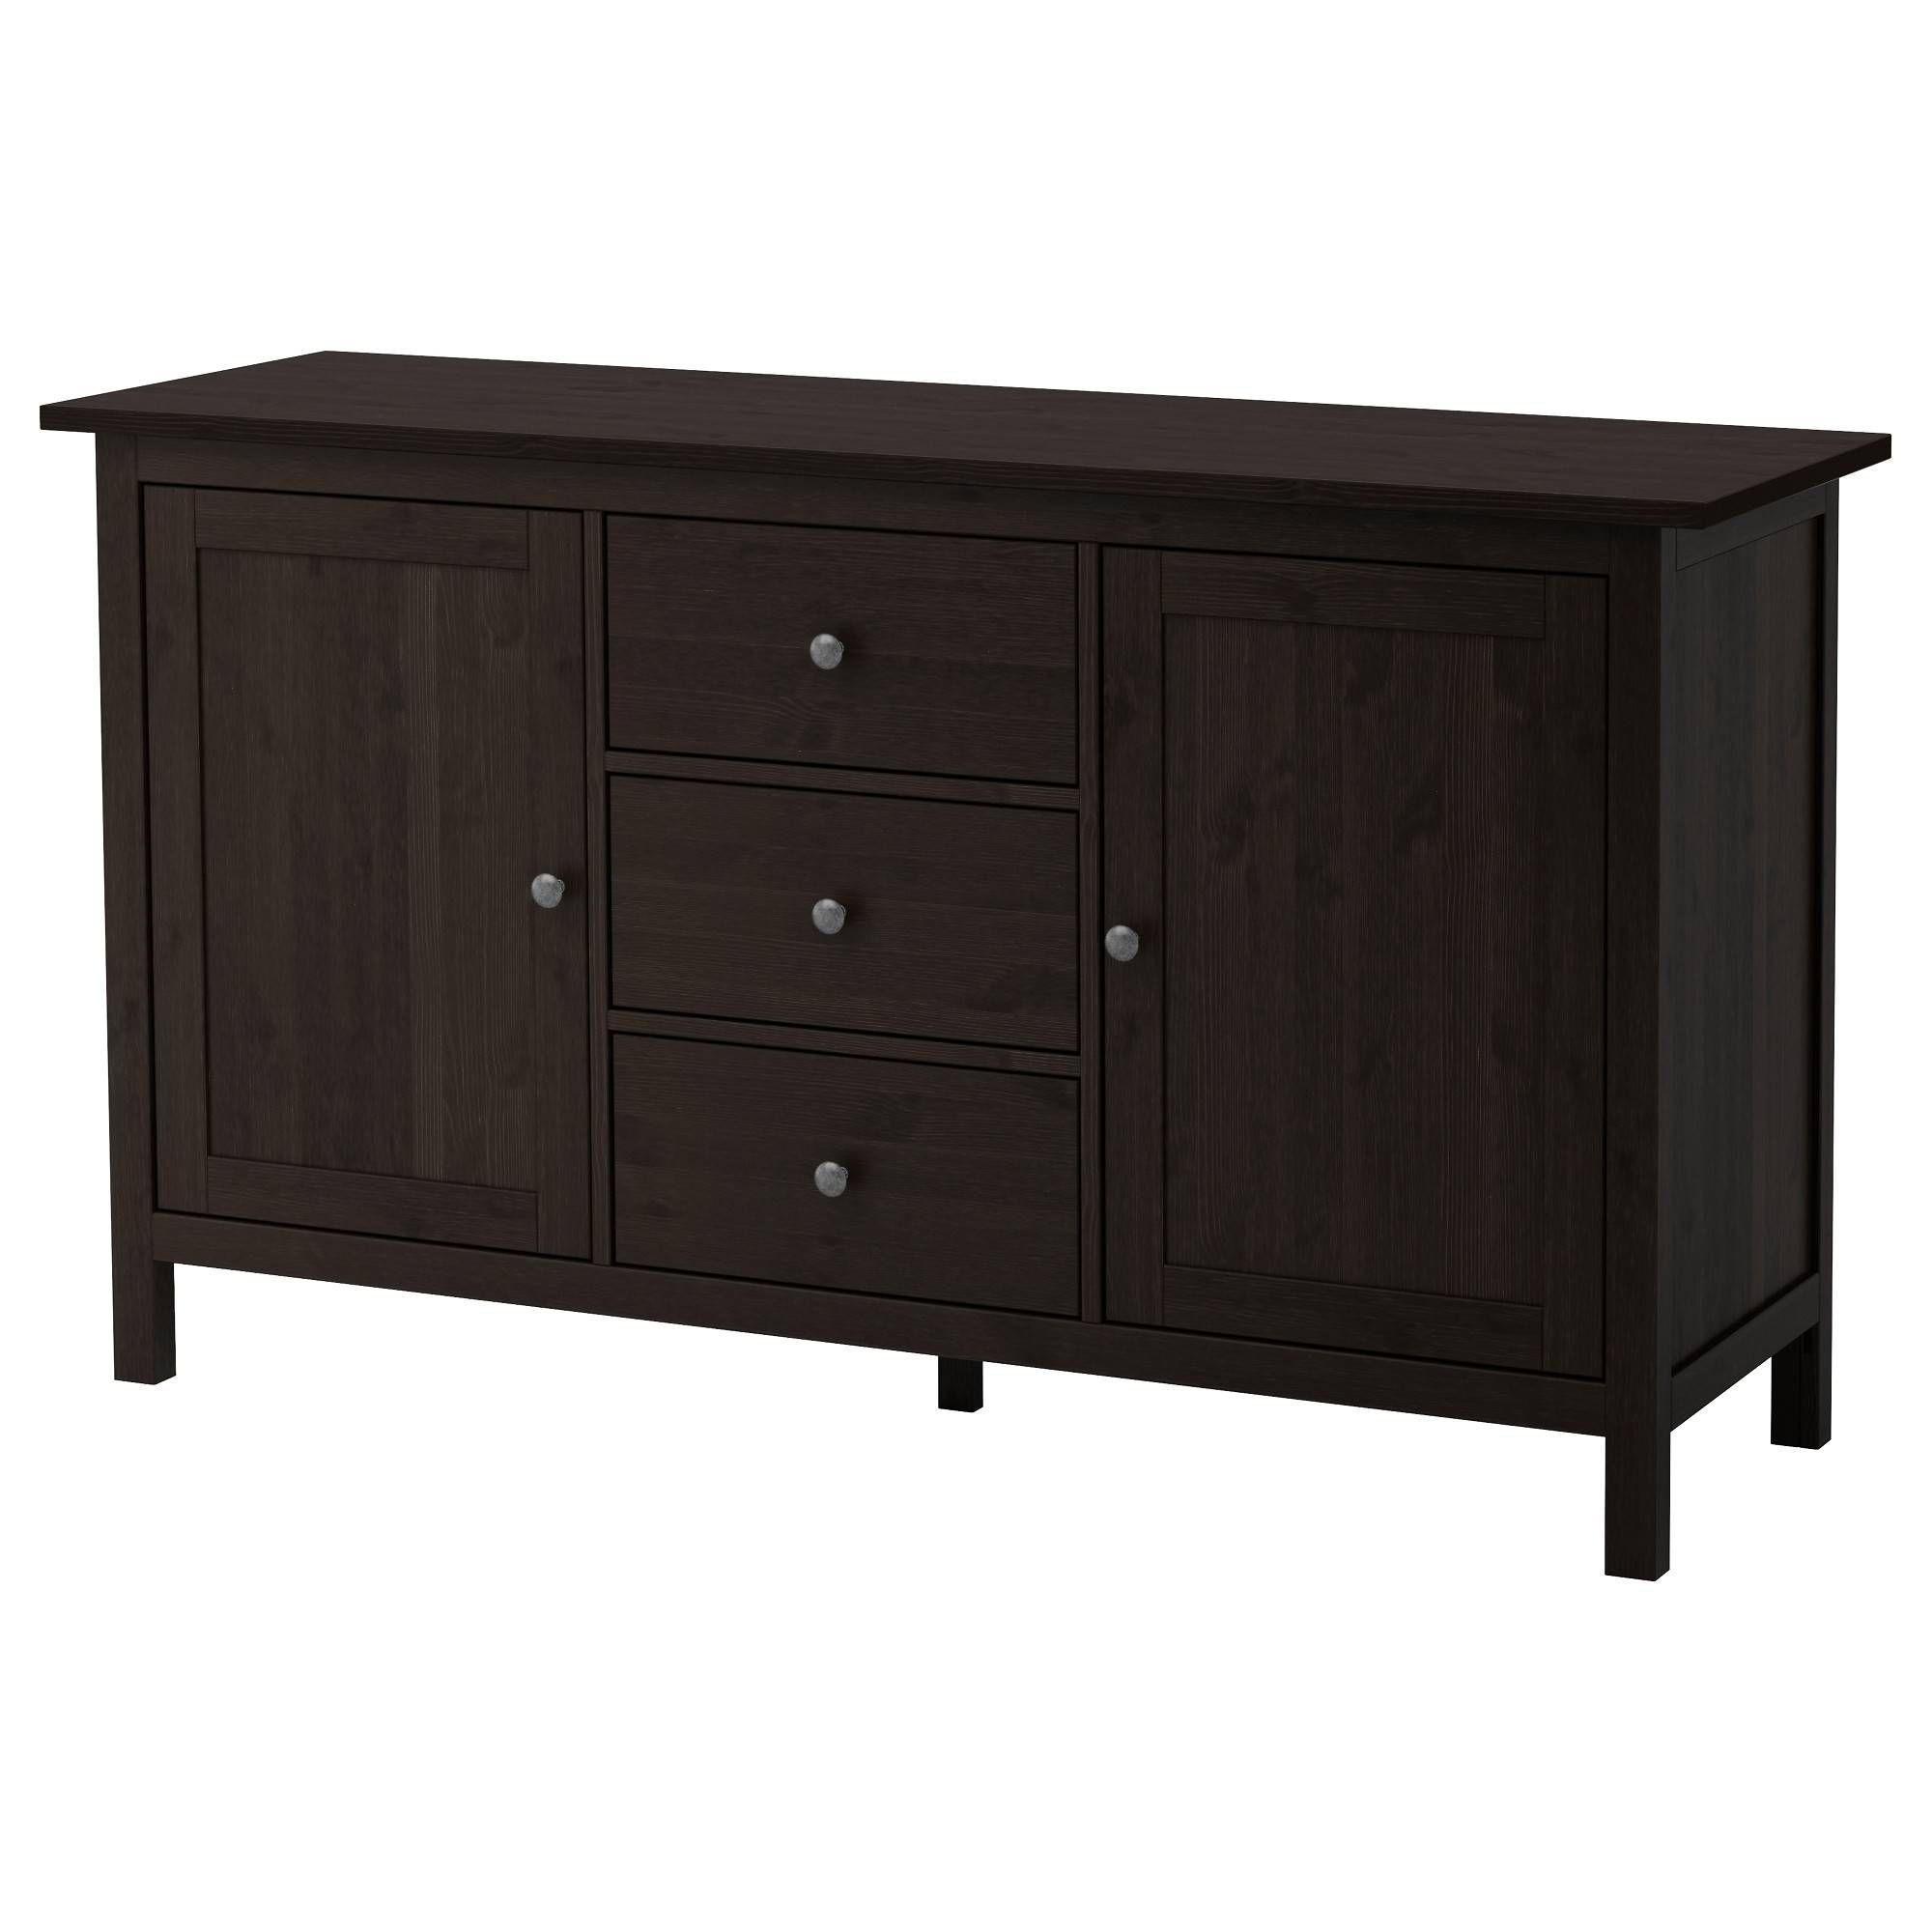 Hemnes Sideboard – Black Brown – Ikea With Most Up To Date Ikea Sideboards (View 10 of 15)